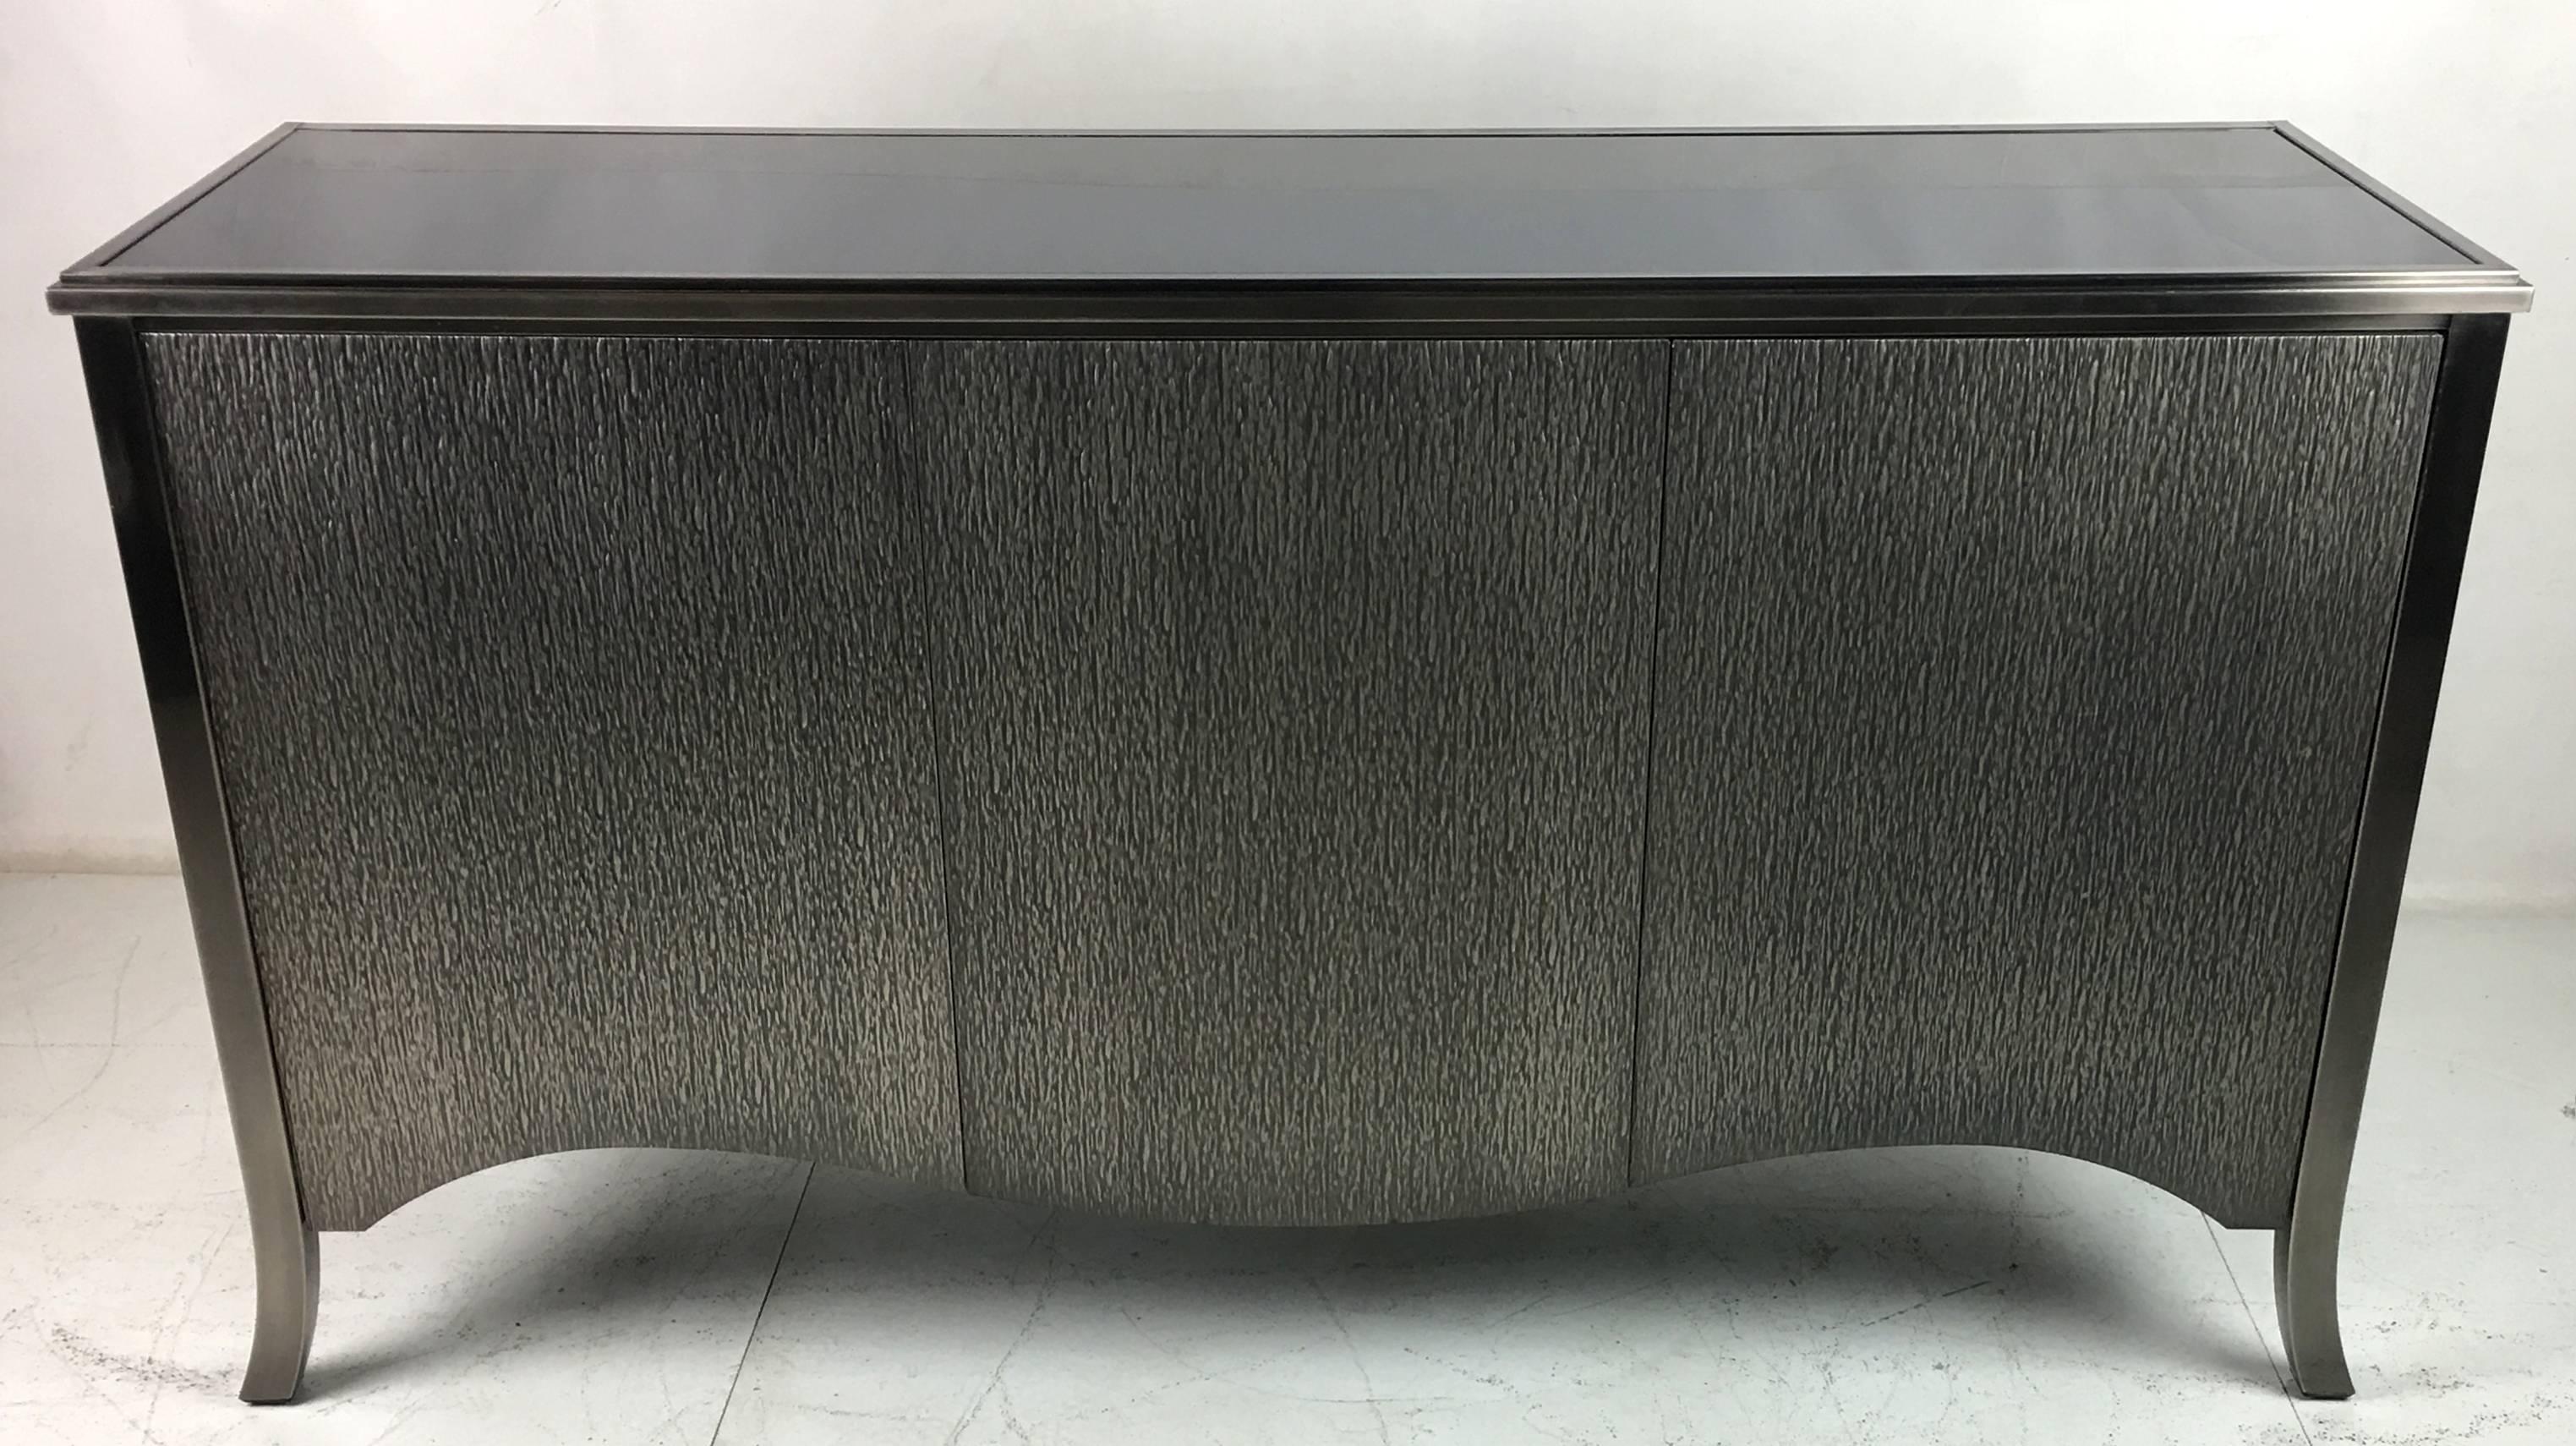 Textured Steel clad cabinet with steel cabriole legs by Mastercraft. The three-door buffet has an inset black glass top and adjustable height interior shelves. The door fronts and sides are clad in heavy-gauge embossed steel. Top quality